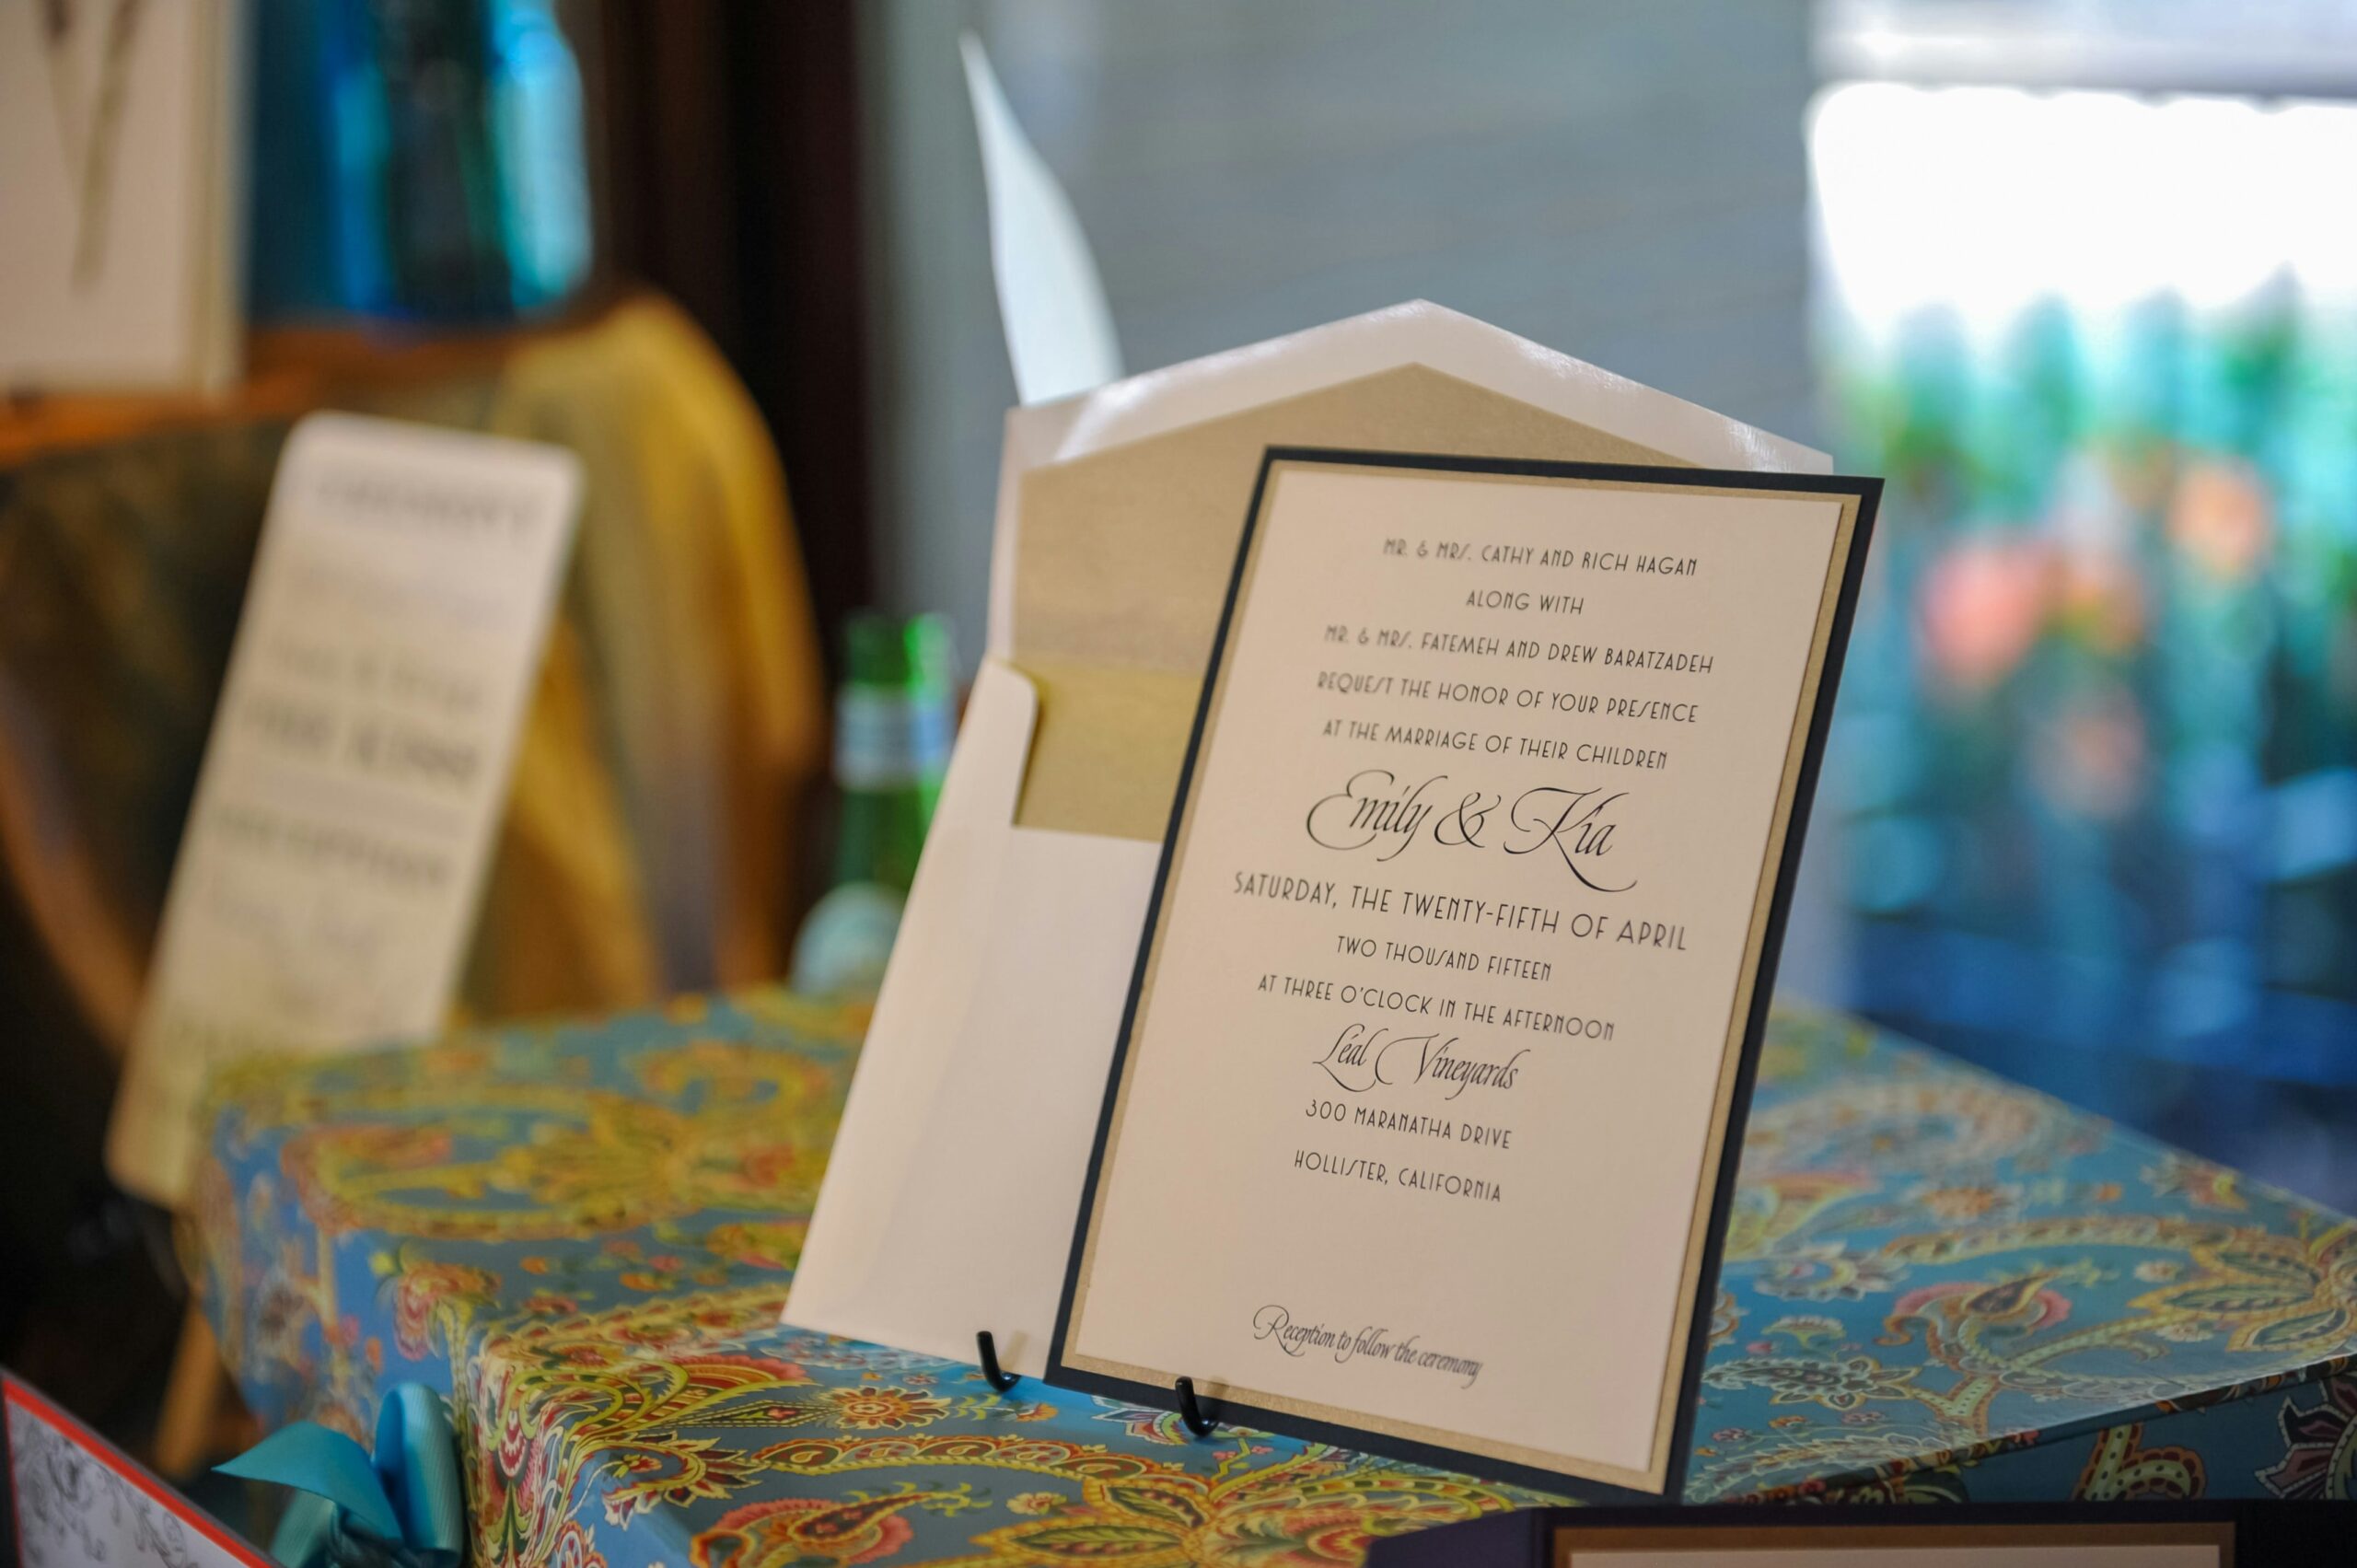 Save the date card on a stand